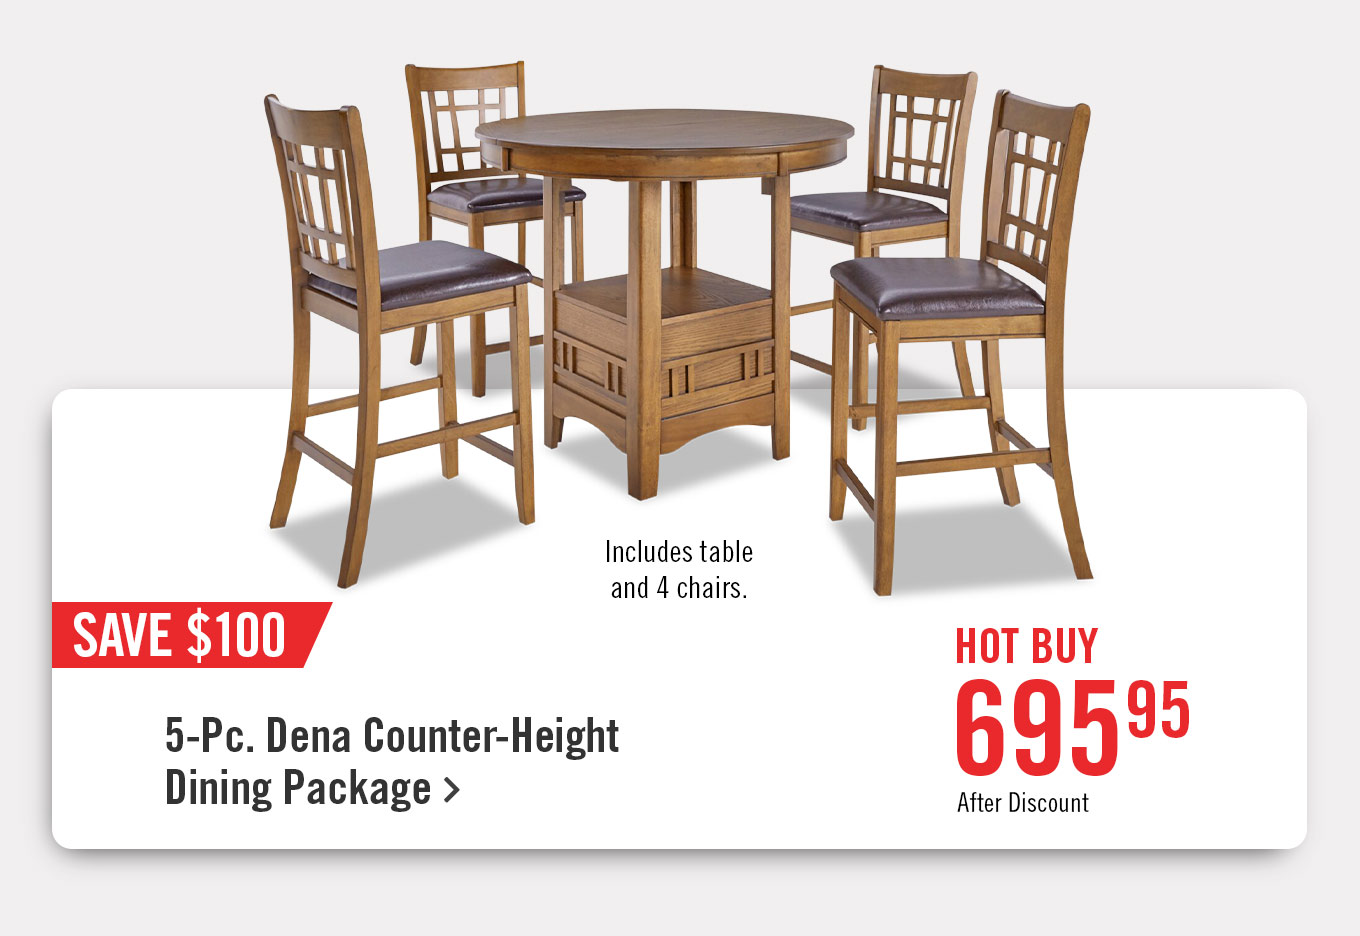 5 piece Dena counter-height dining package.